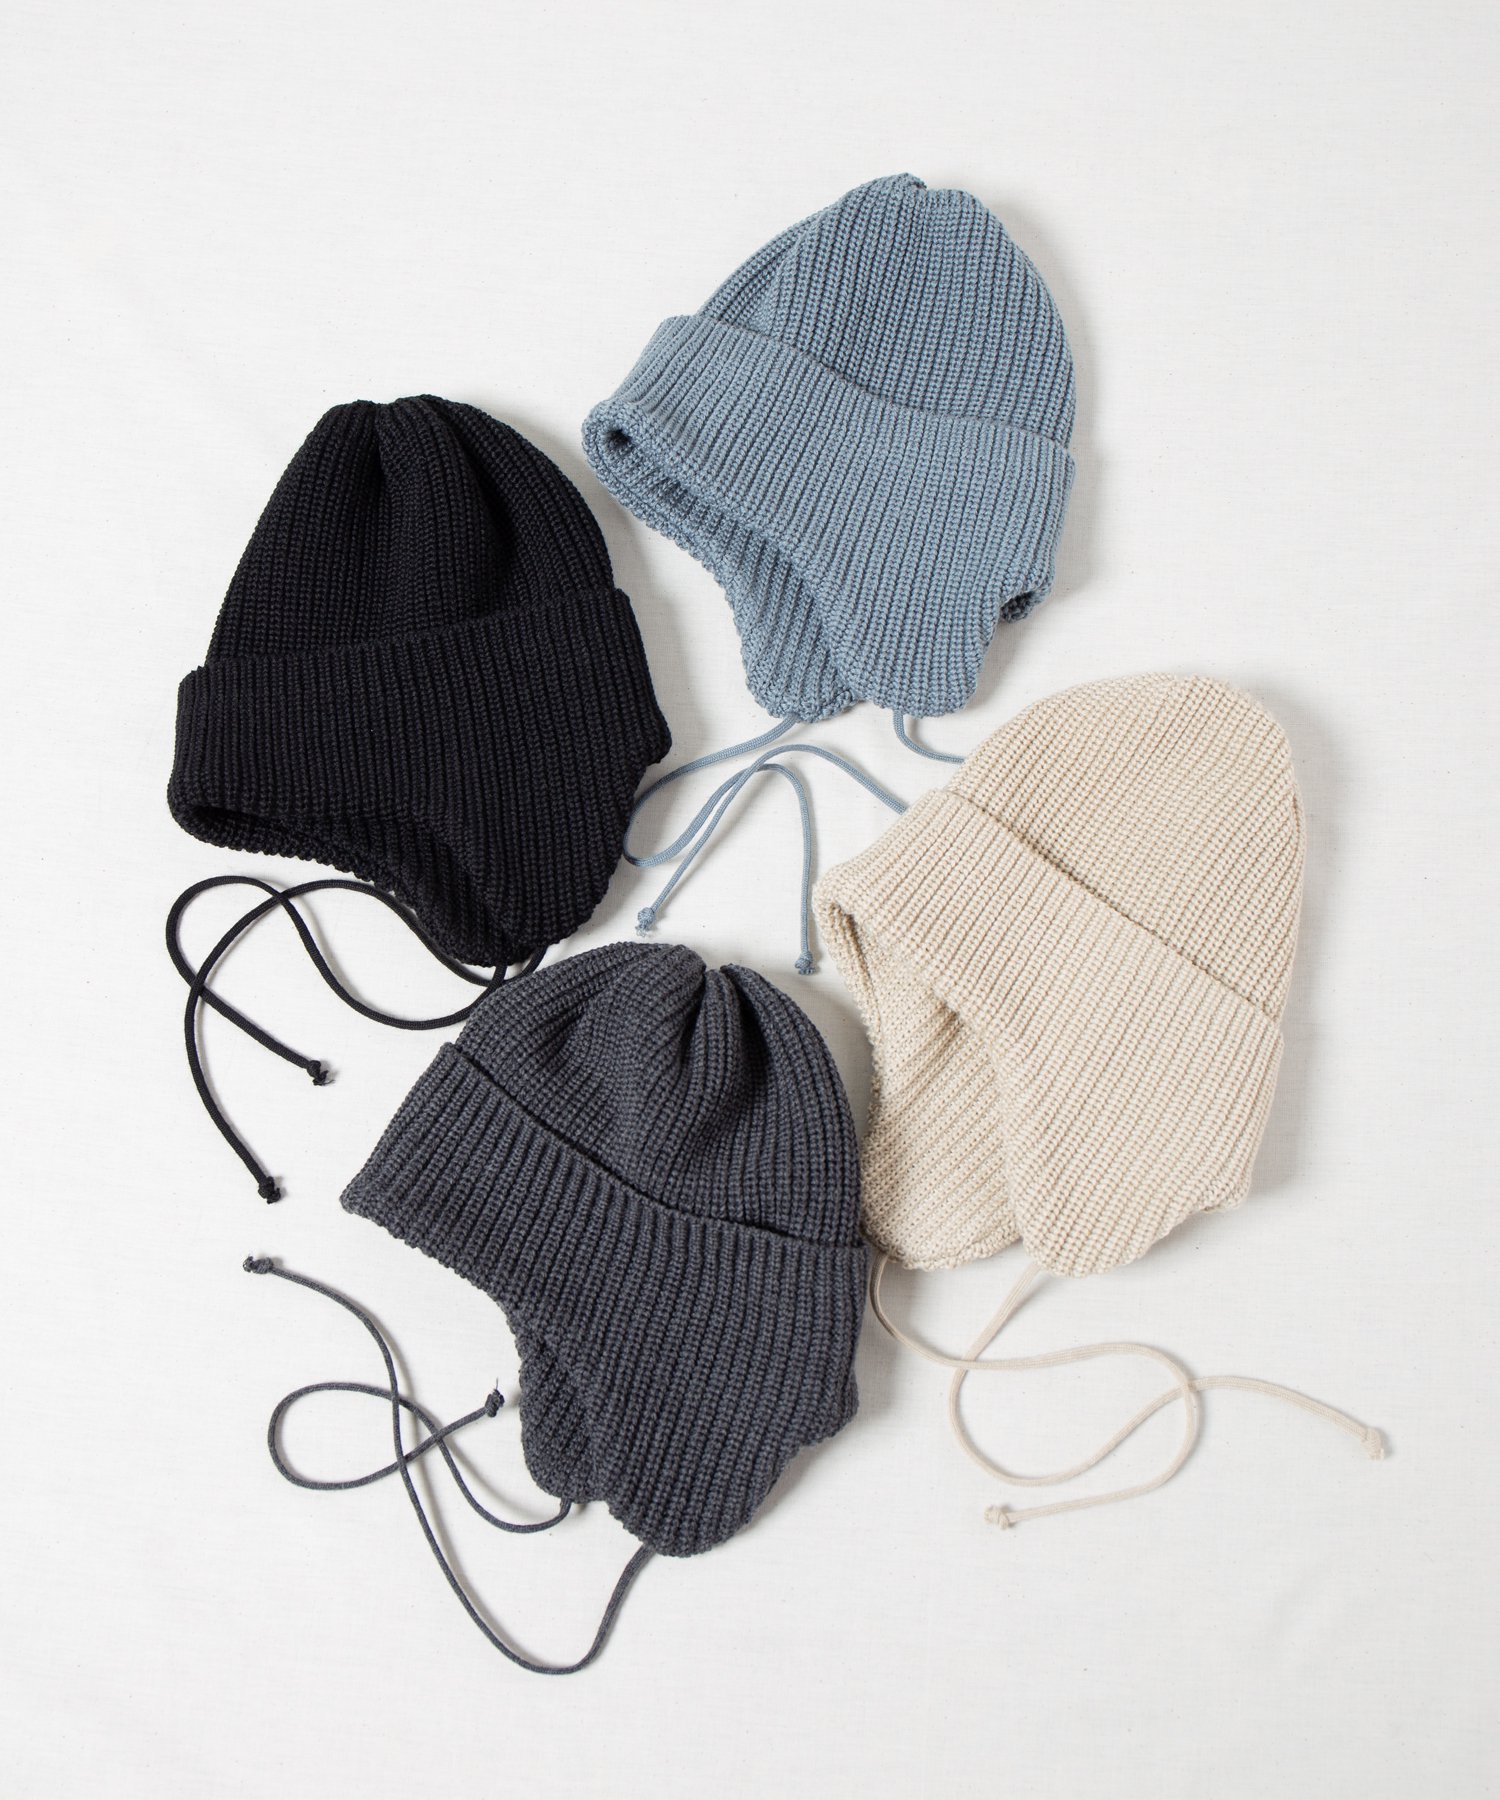 <img class='new_mark_img1' src='https://img.shop-pro.jp/img/new/icons20.gif' style='border:none;display:inline;margin:0px;padding:0px;width:auto;' />【Racal】 Ear Cuff Knit Cap / イヤーカフニットキャップ